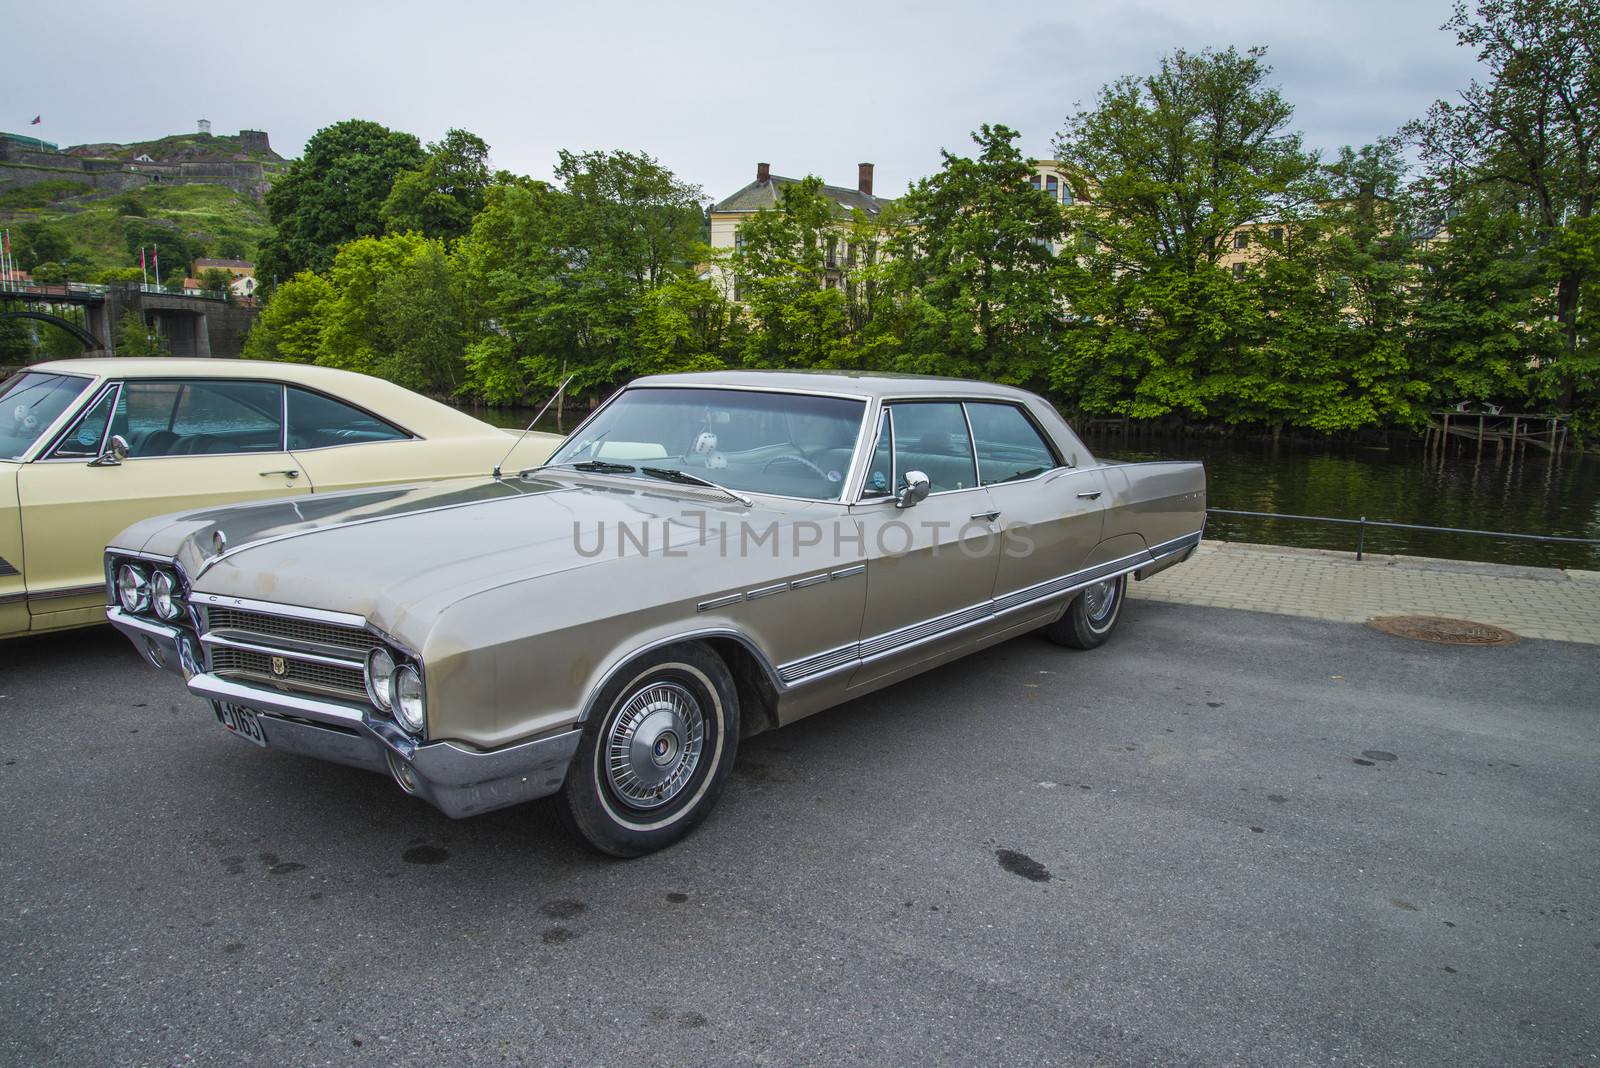 1965 buick electra, classic amcar by steirus